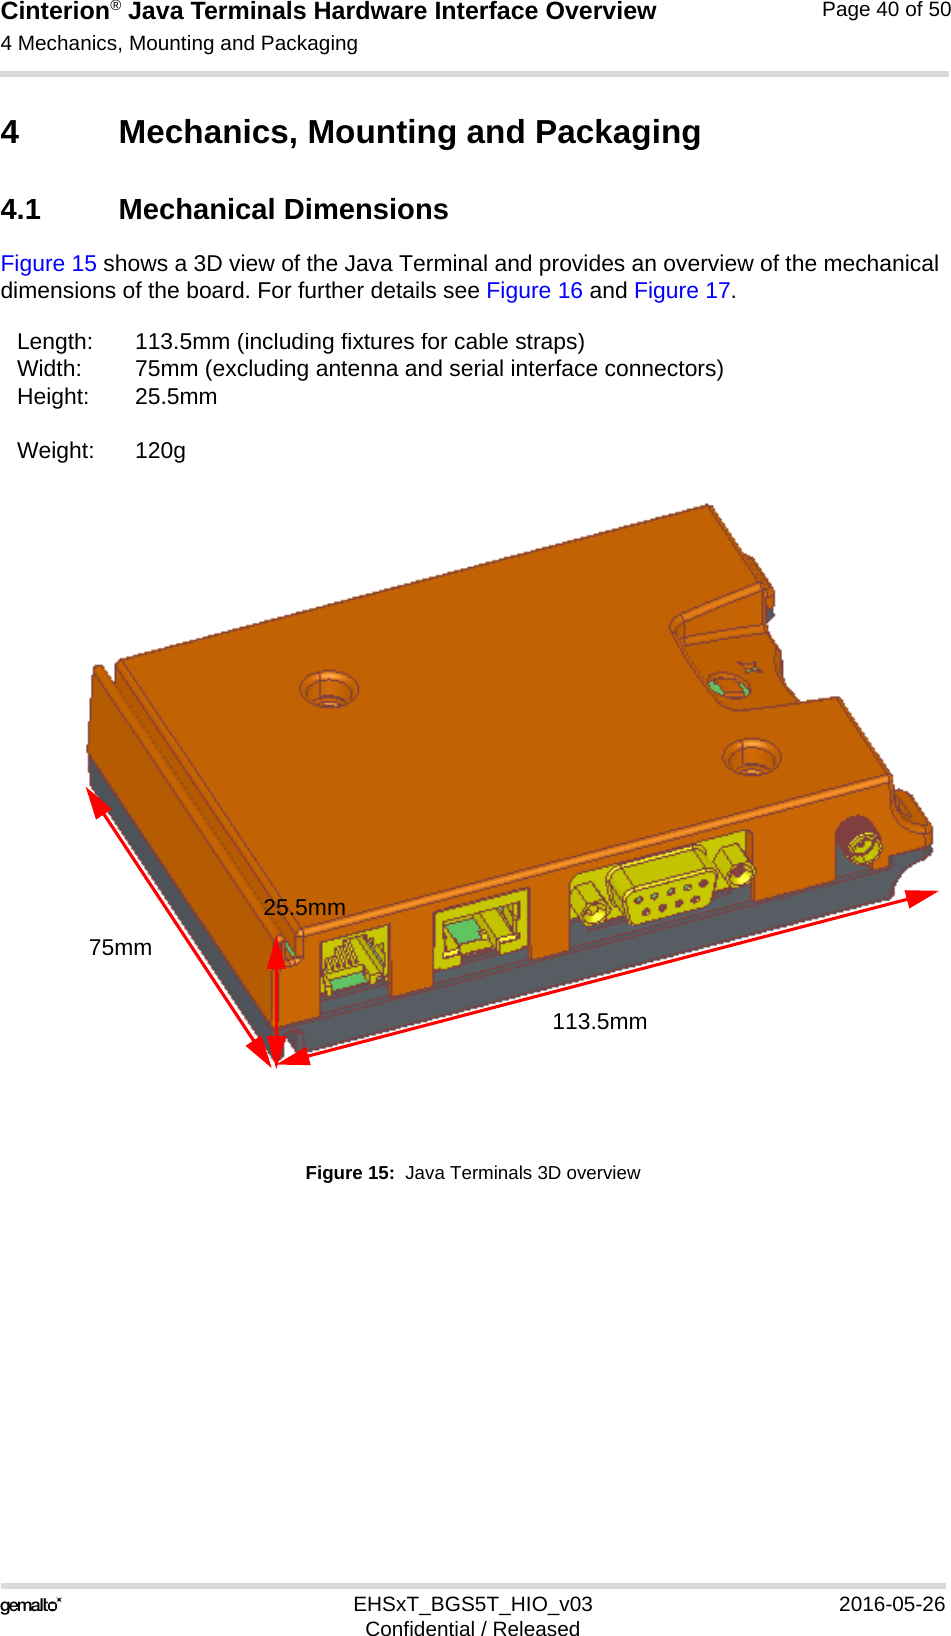 Cinterion® Java Terminals Hardware Interface Overview4 Mechanics, Mounting and Packaging44EHSxT_BGS5T_HIO_v03 2016-05-26Confidential / ReleasedPage 40 of 504 Mechanics, Mounting and Packaging4.1 Mechanical DimensionsFigure 15 shows a 3D view of the Java Terminal and provides an overview of the mechanical dimensions of the board. For further details see Figure 16 and Figure 17. Figure 15:  Java Terminals 3D overviewLength: 113.5mm (including fixtures for cable straps)Width: 75mm (excluding antenna and serial interface connectors)Height: 25.5mmWeight: 120g113.5mm75mm25.5mm